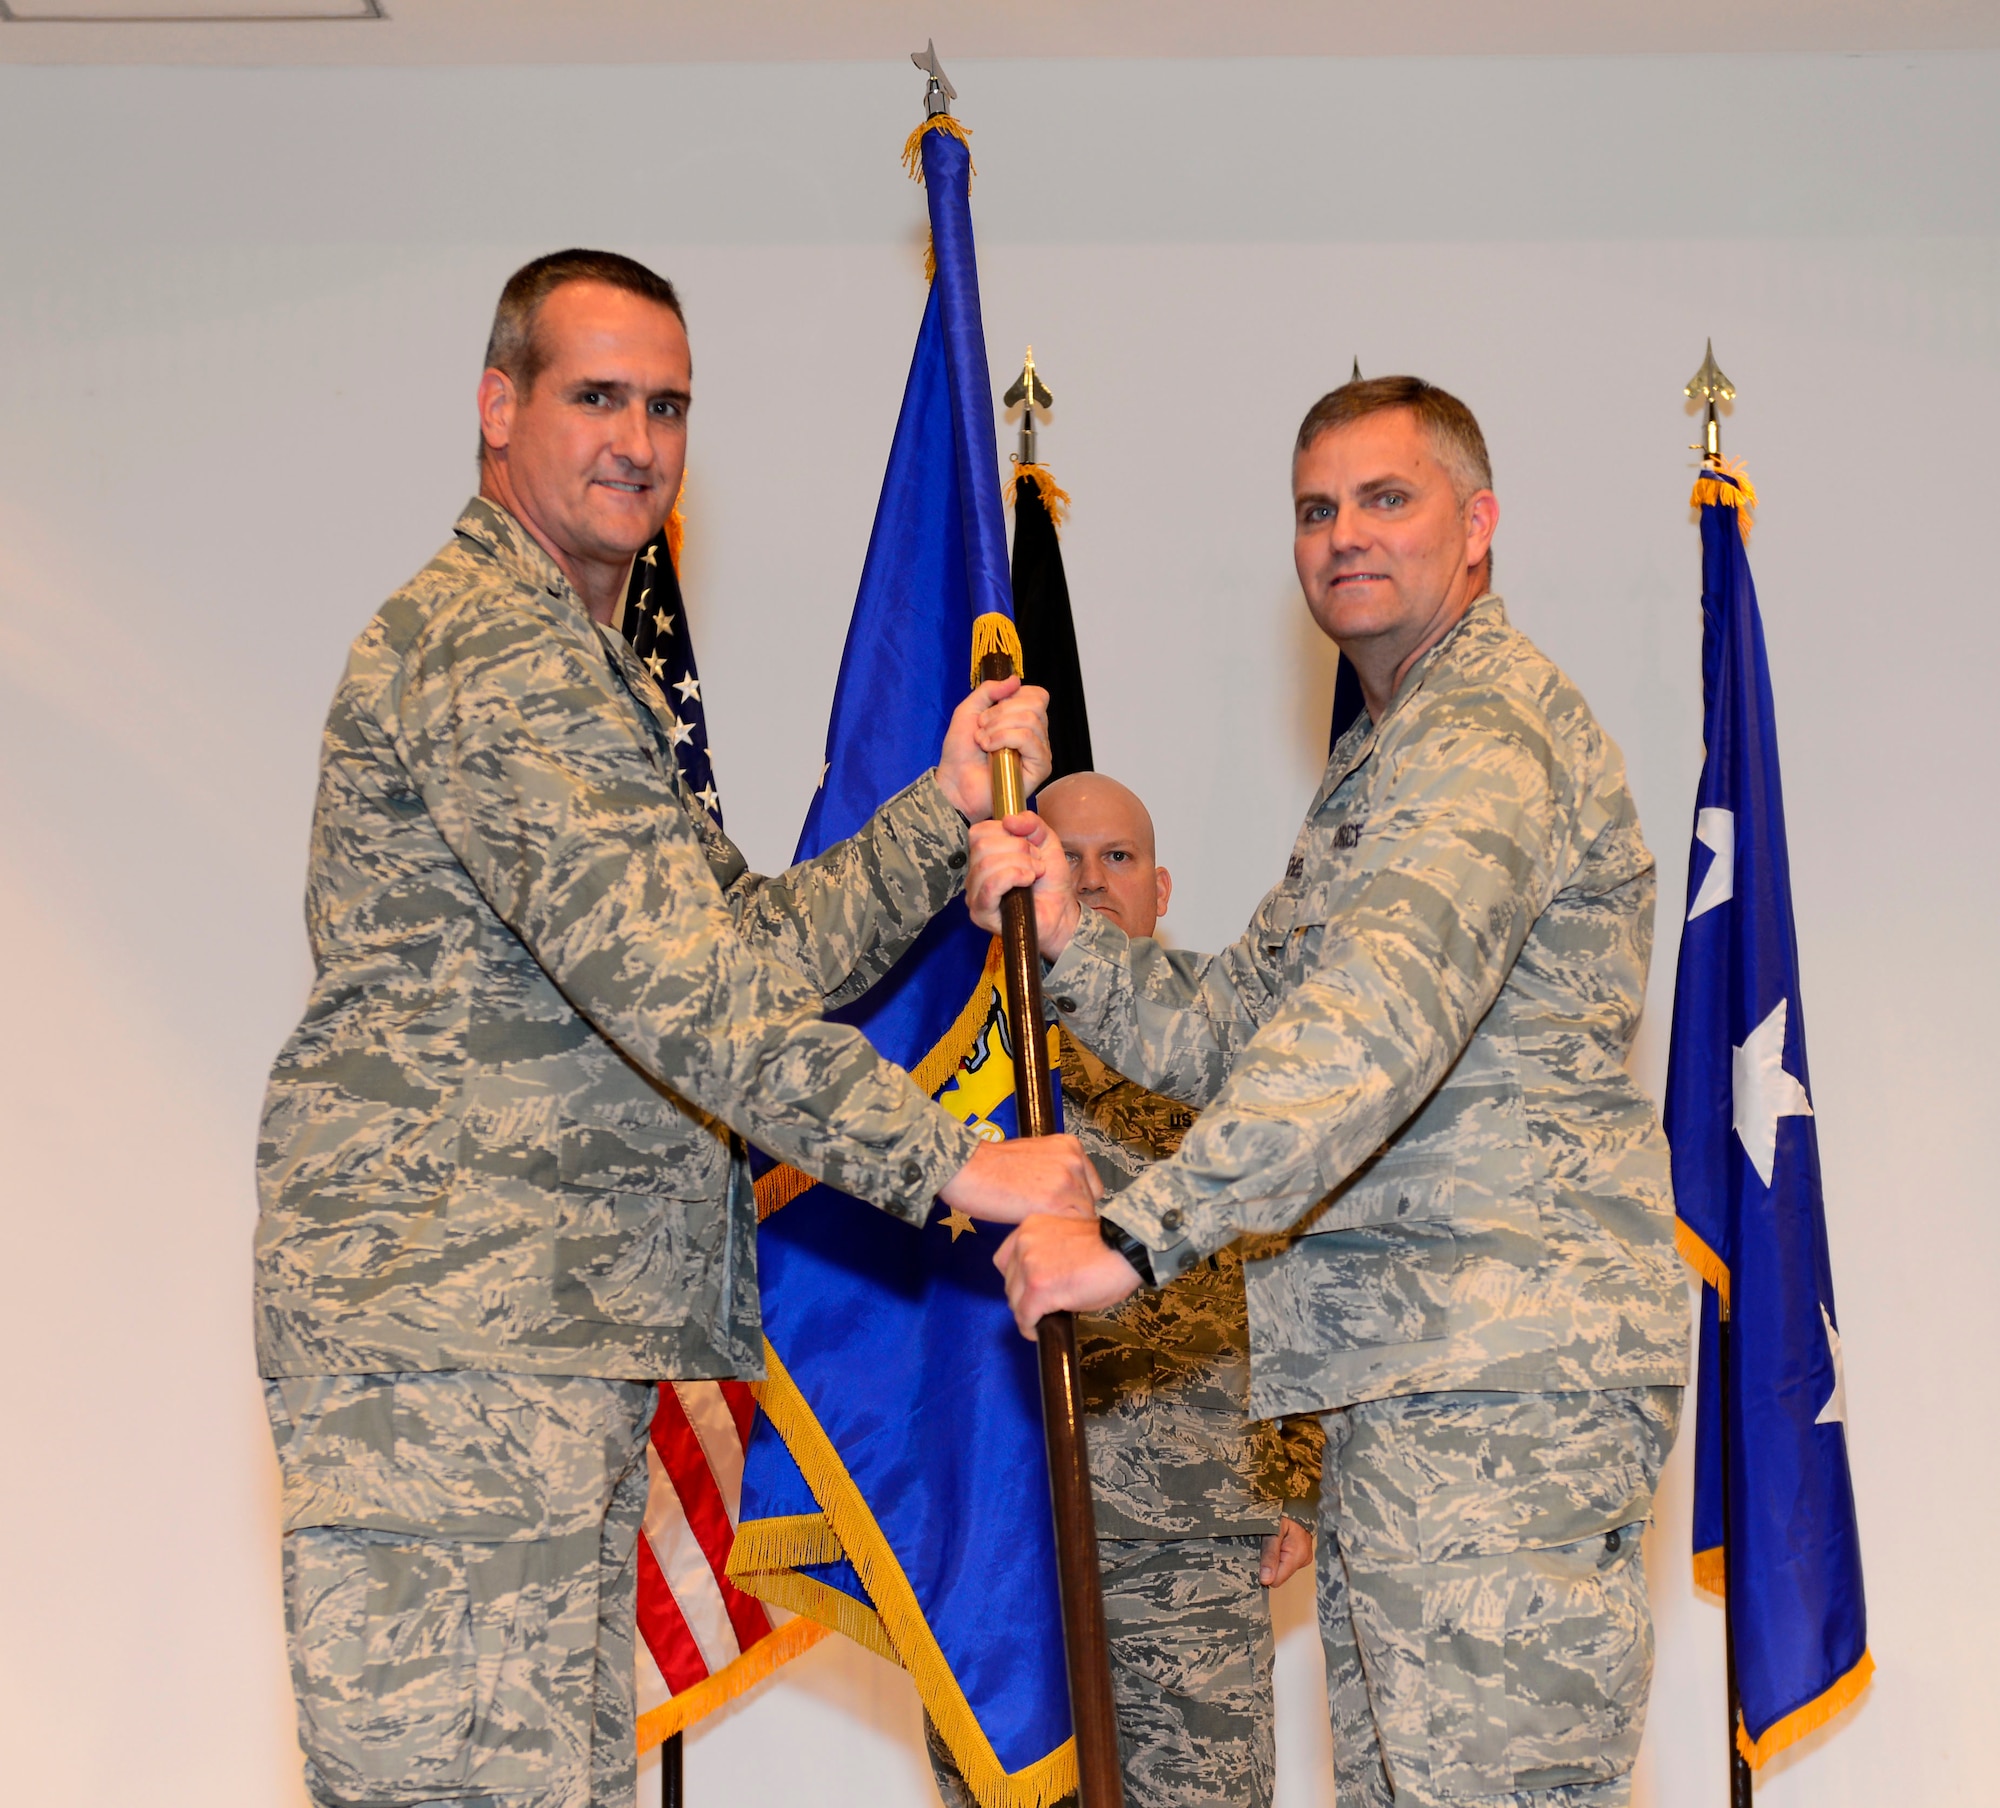 U.S. Maj. Gen. Peter Gersten,  Commander of the Ninth Air and Space Expeditionary Task Force, passes the guidon to Col. Michael Koscheski, the 332nd Air Expeditionary Wing commander, during an activation and assumption of command ceremony at an undisclosed location in Southwest Asia May 19, 2015. The 332nd AEW activated as the only combat wing within the Ninth AETF-L. (U.S. Air Force photo by Senior Airman Racheal E. Watson)